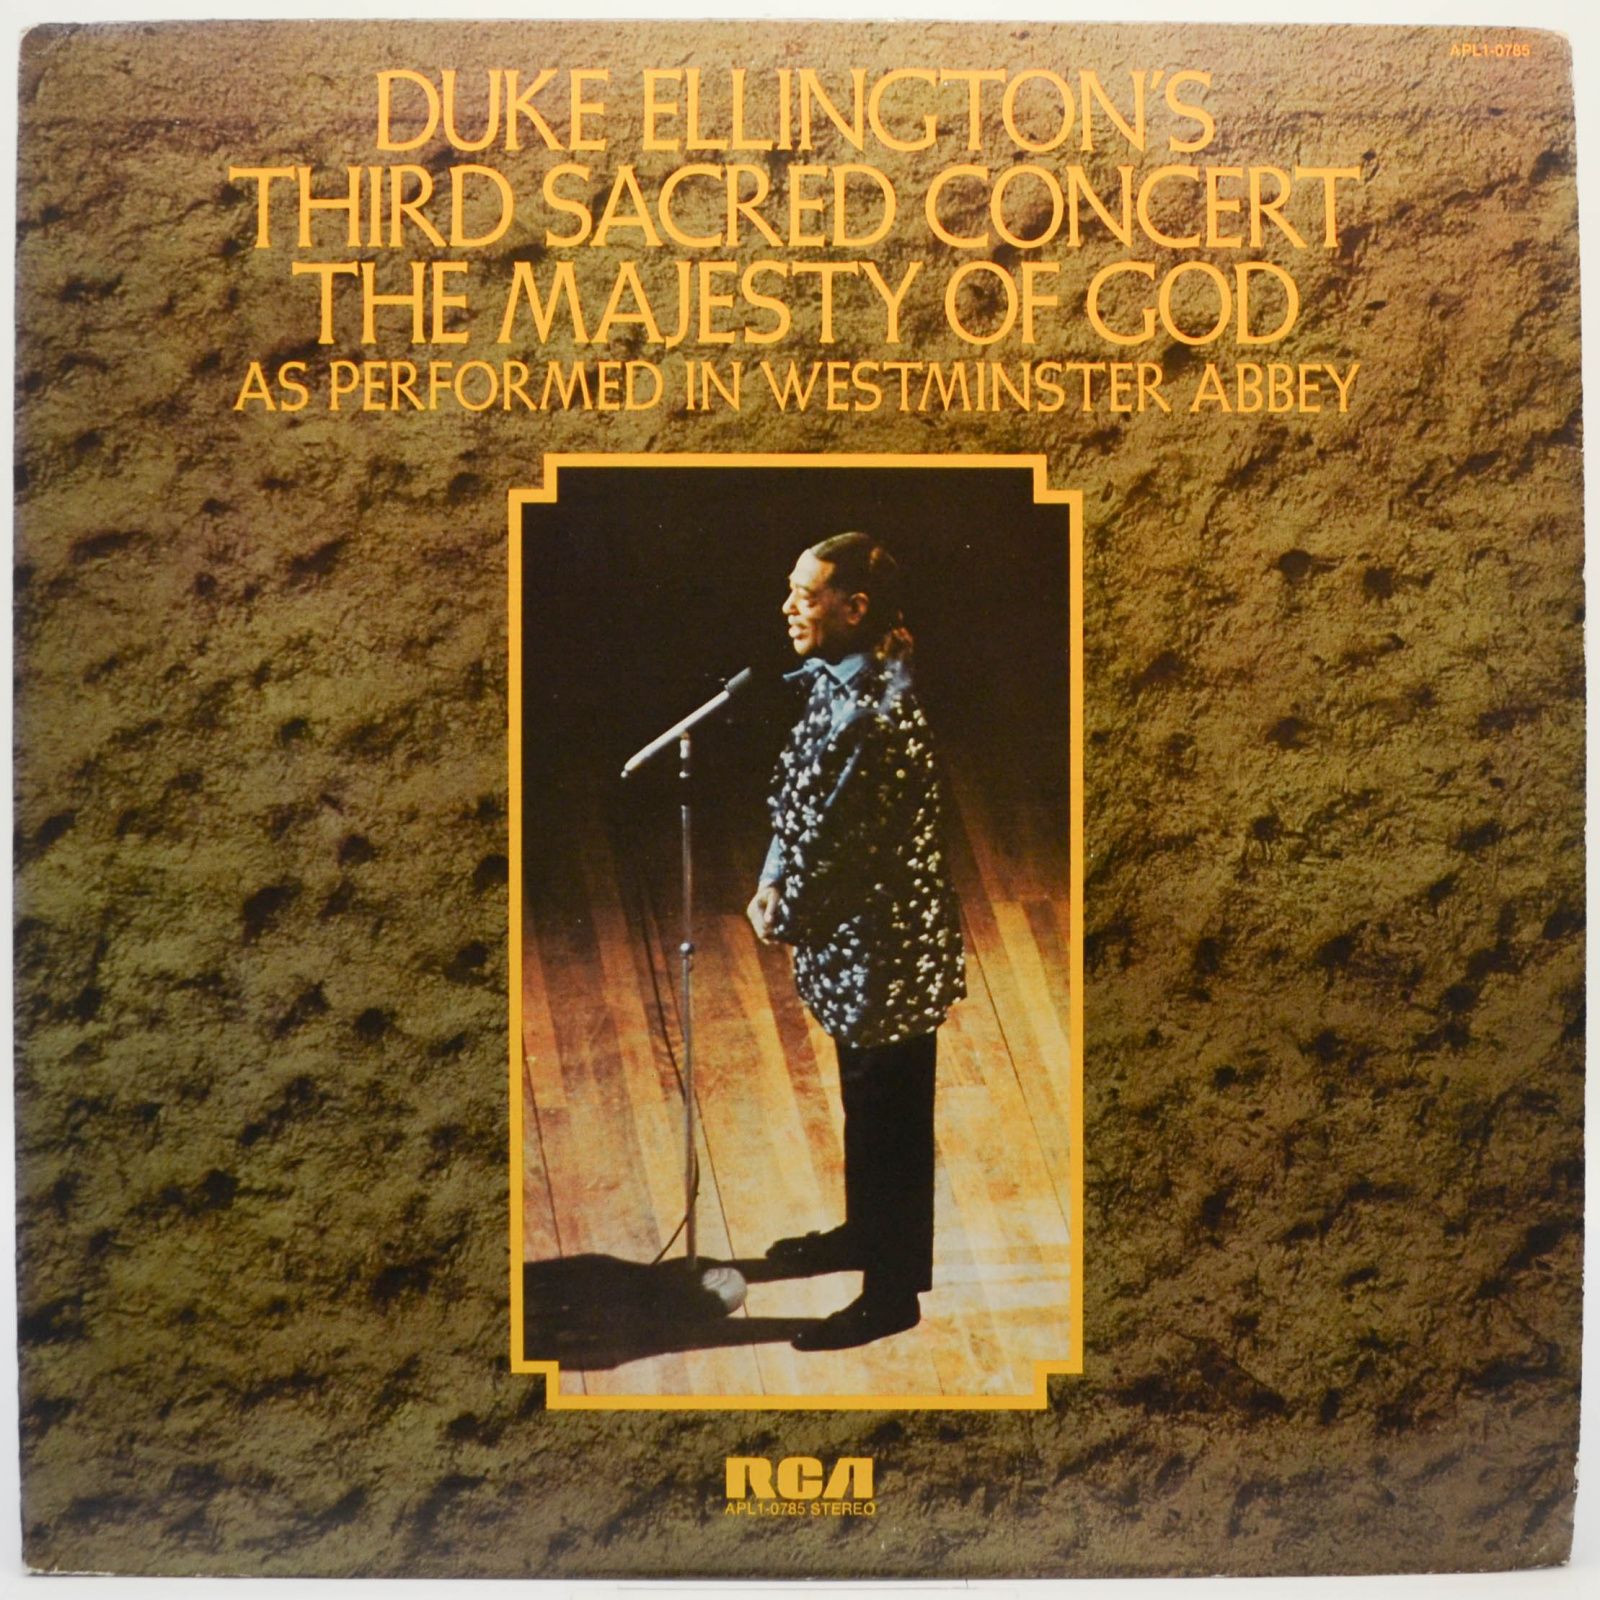 Duke Ellington And His Orchestra — Duke Ellington's Third Sacred Concert, The Majesty Of God, As Performed In Westminster Abbey, 1975